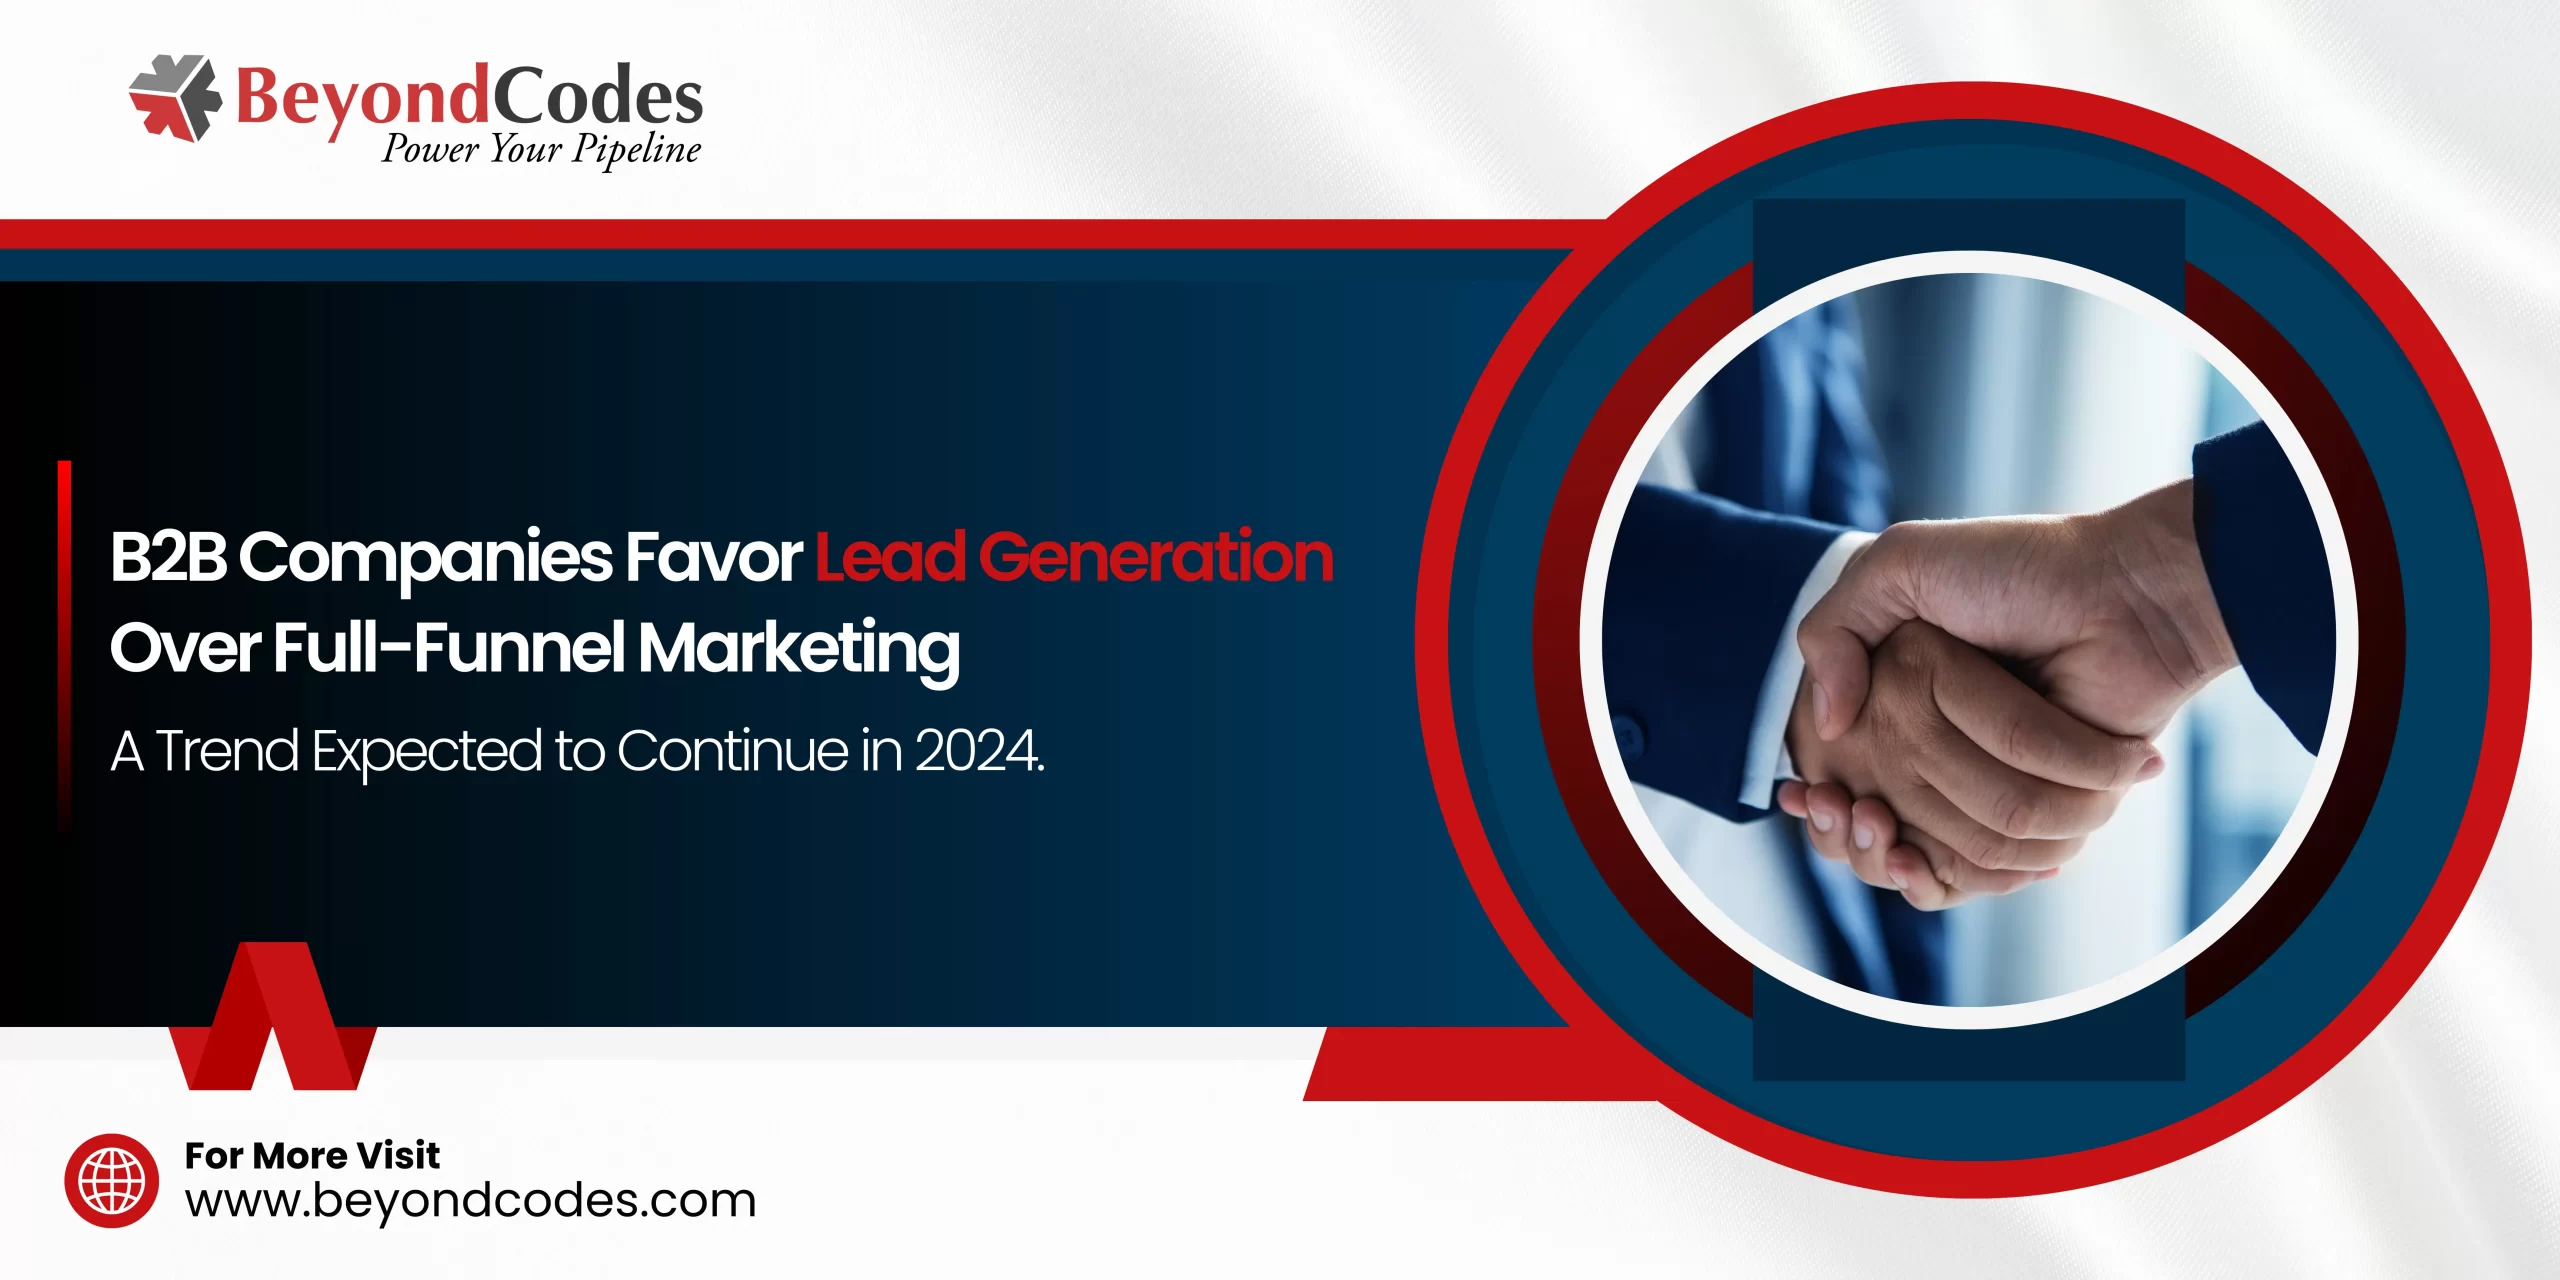 B2B Companies Favor Lead Generation Over Full-Funnel Marketing: A Trend Expected to Continue in 2024